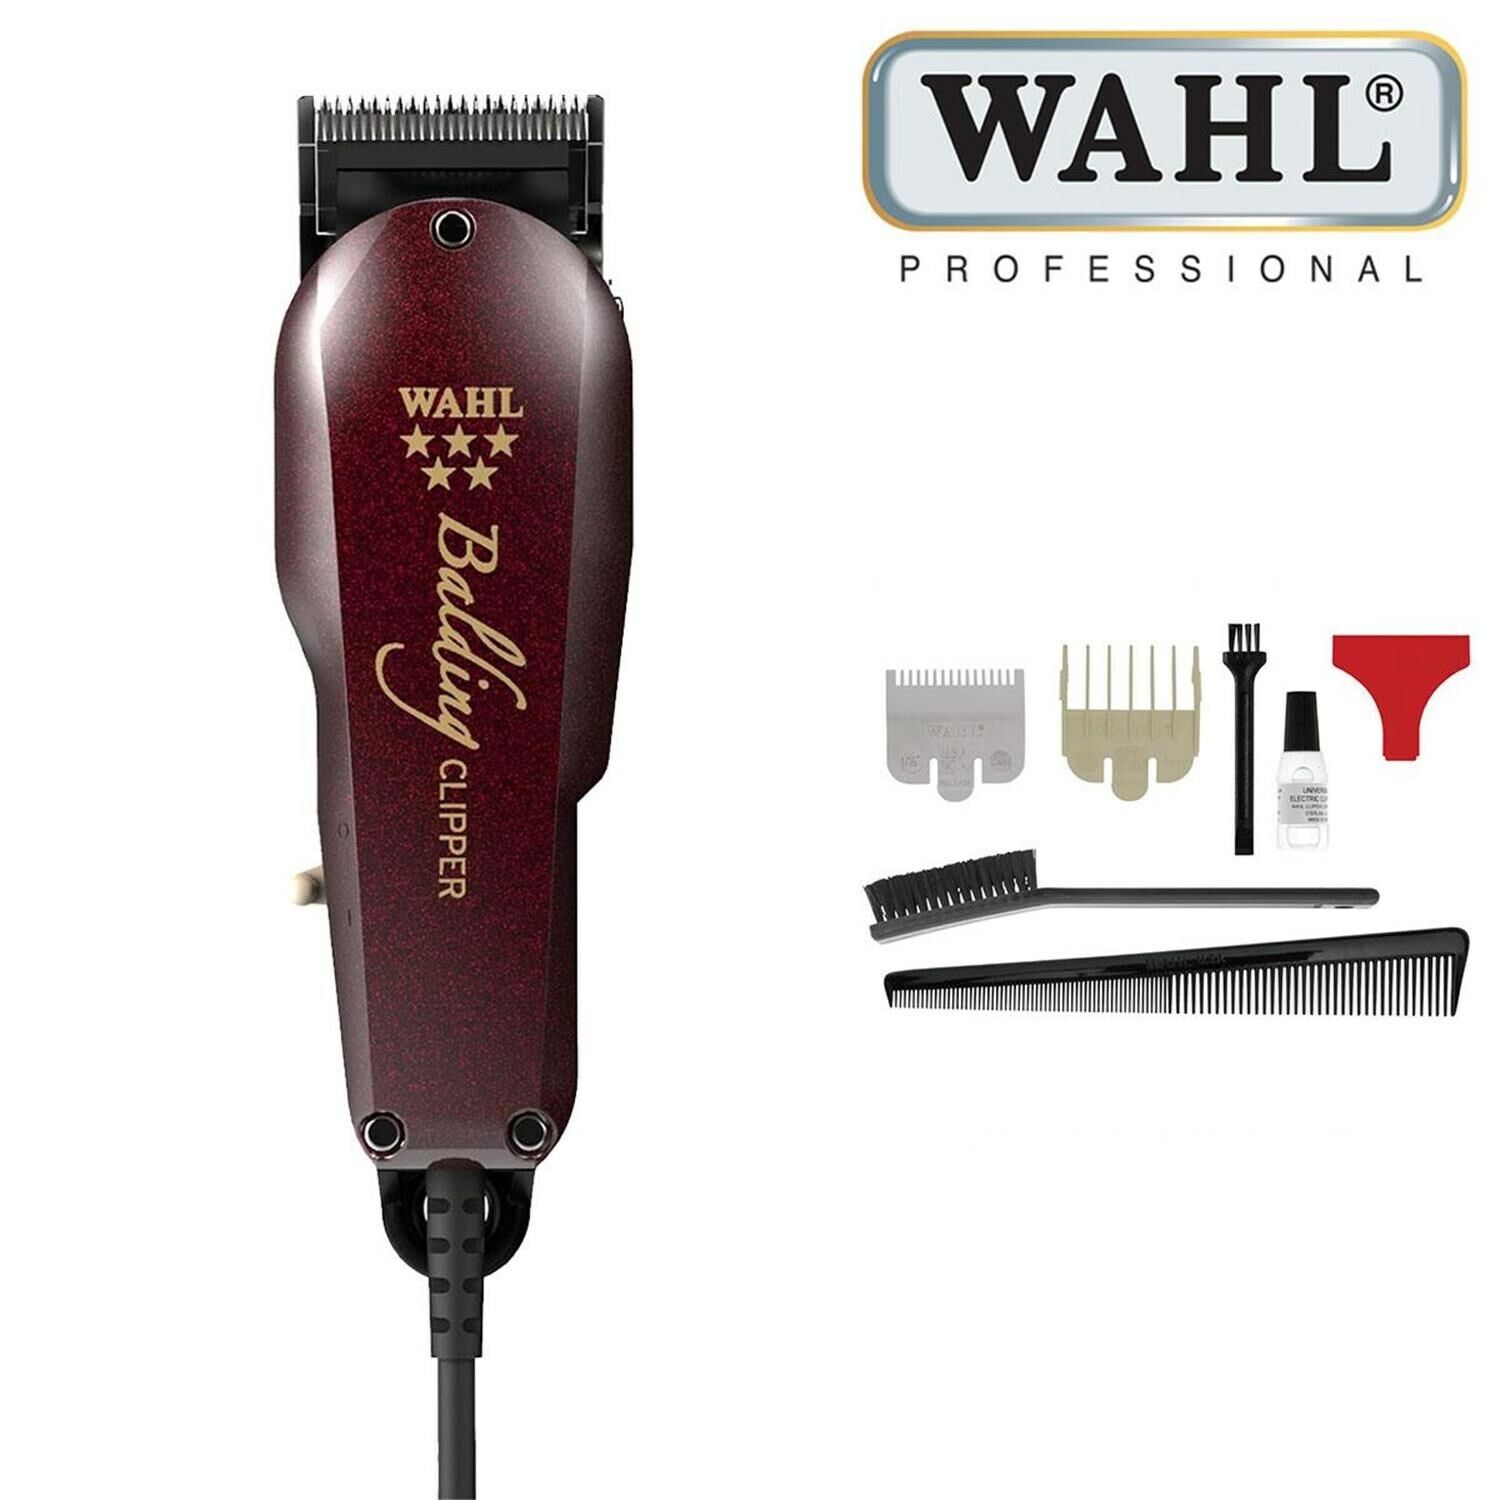 Wahl Corded Balding Hair Clipper  # and  With V5000 Motor  8110-830 5037127016336 | eBay